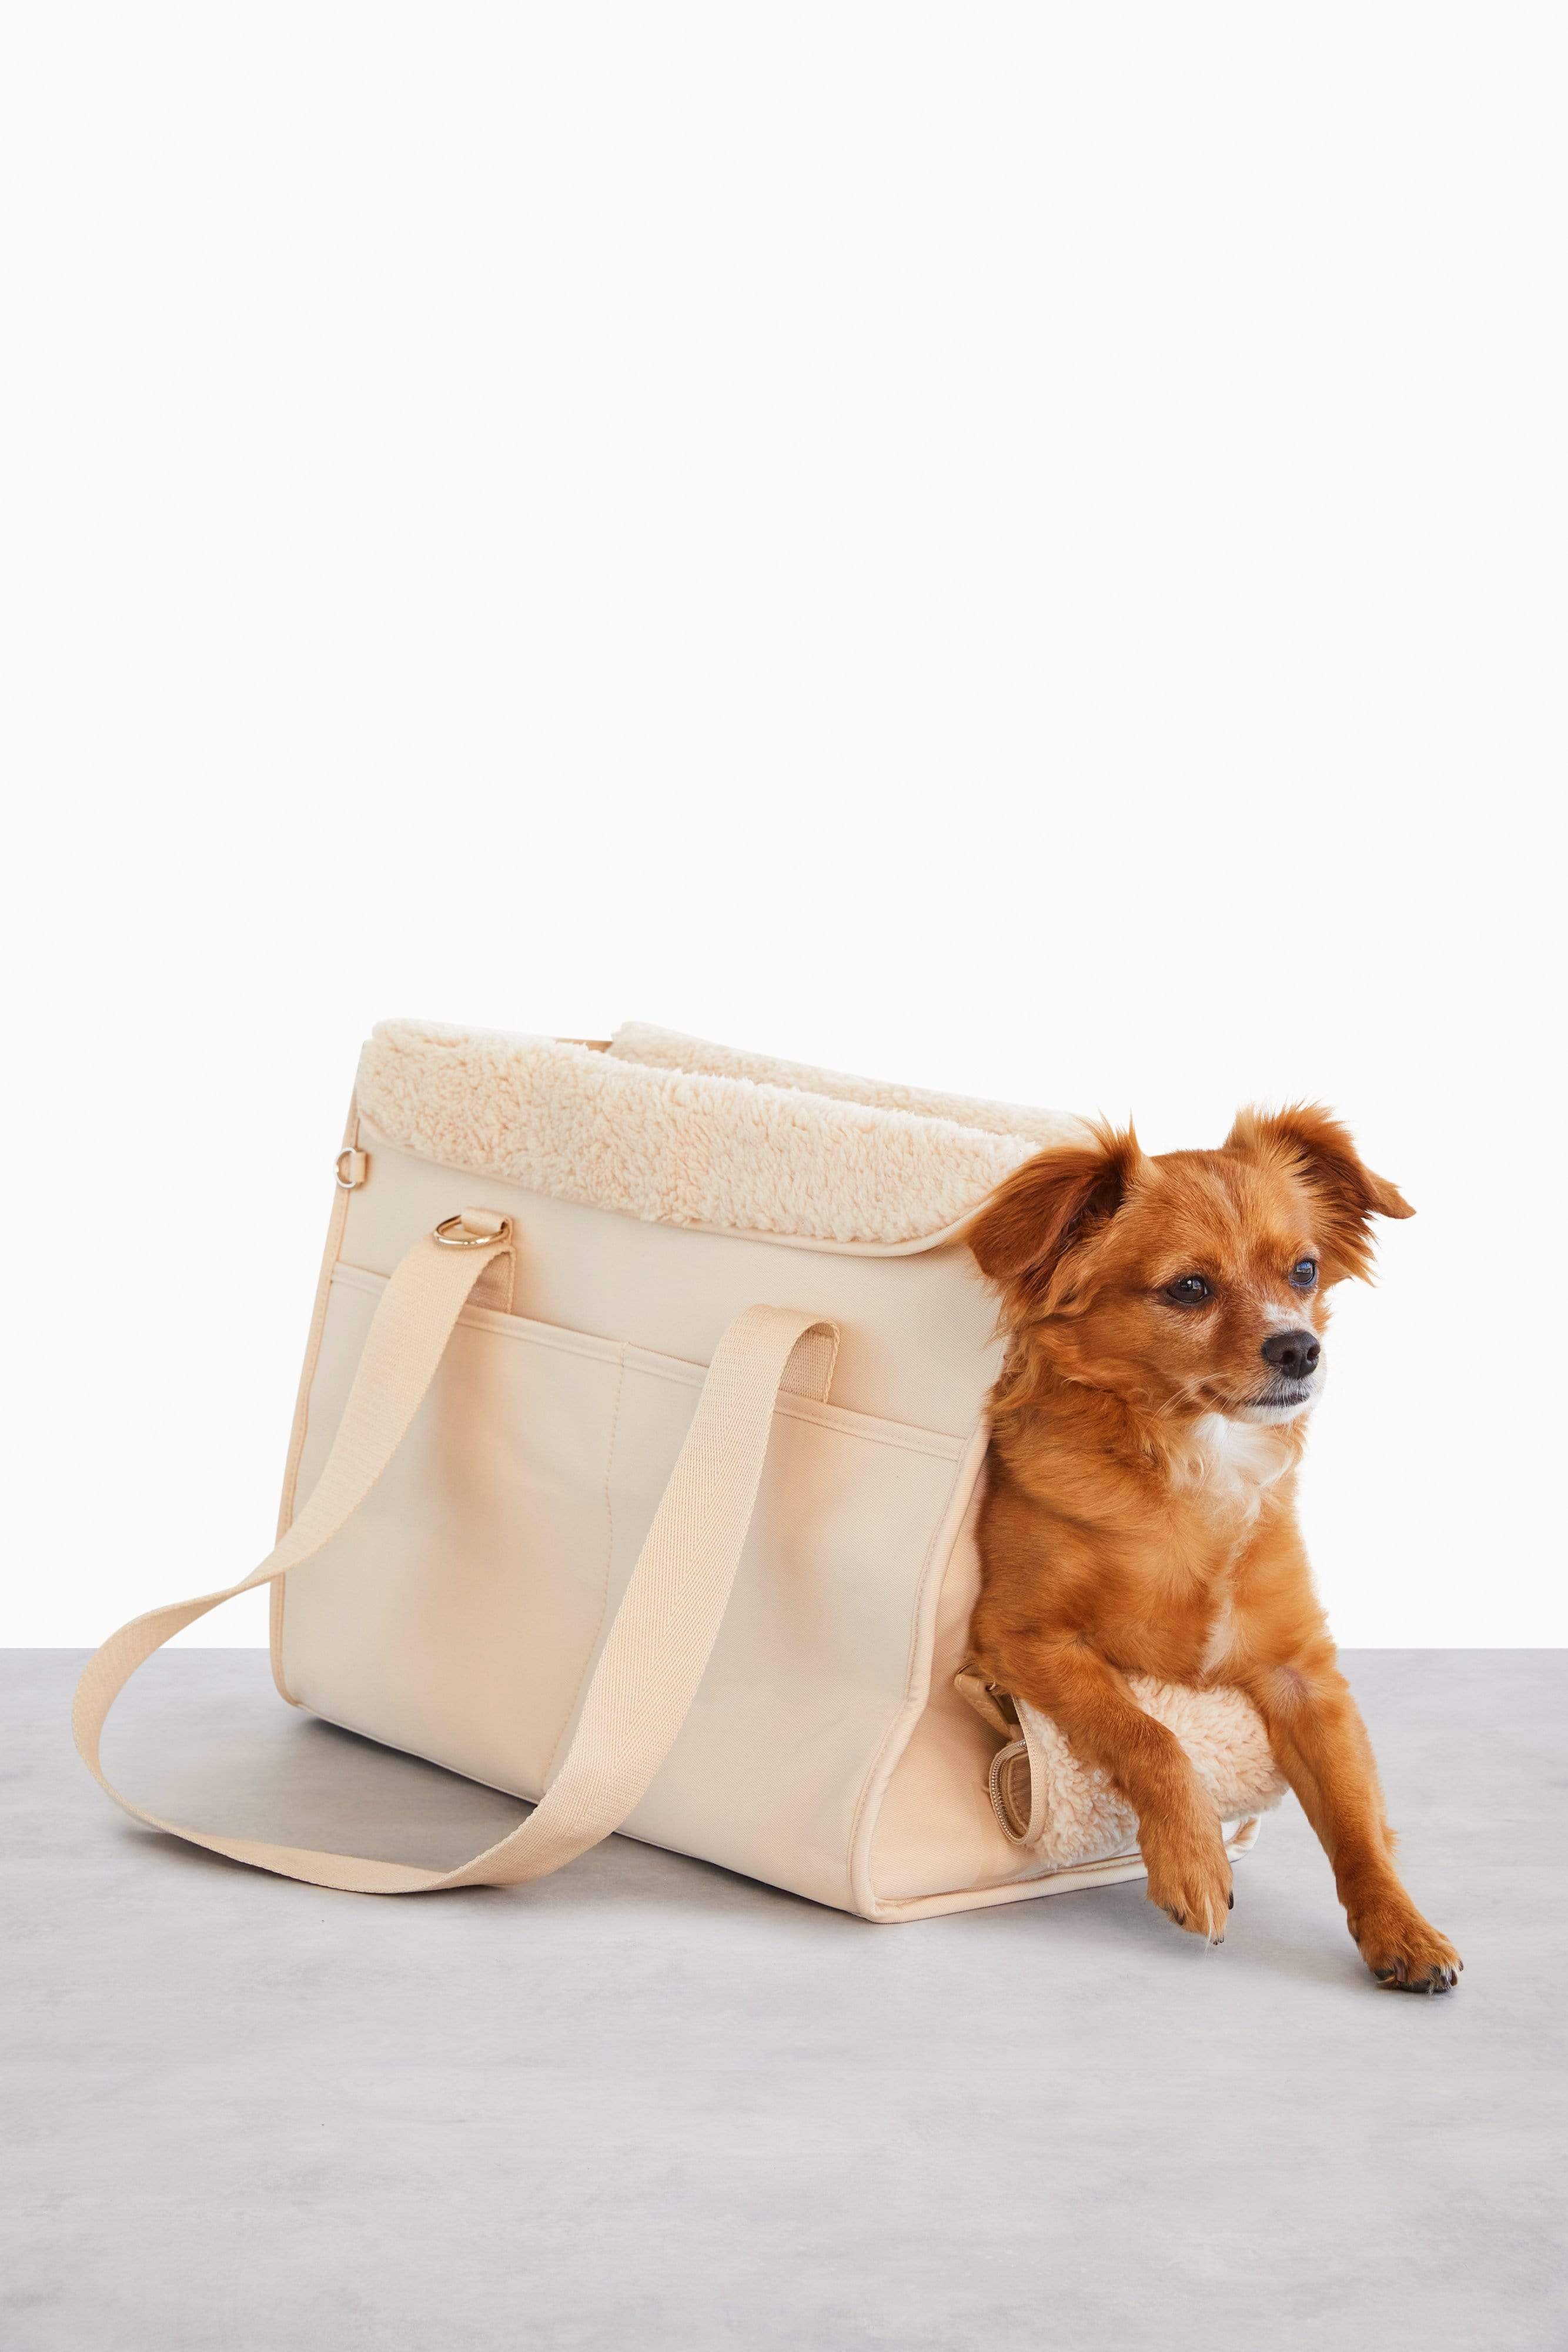 The Best Dog Carrier Bag You Can Buy